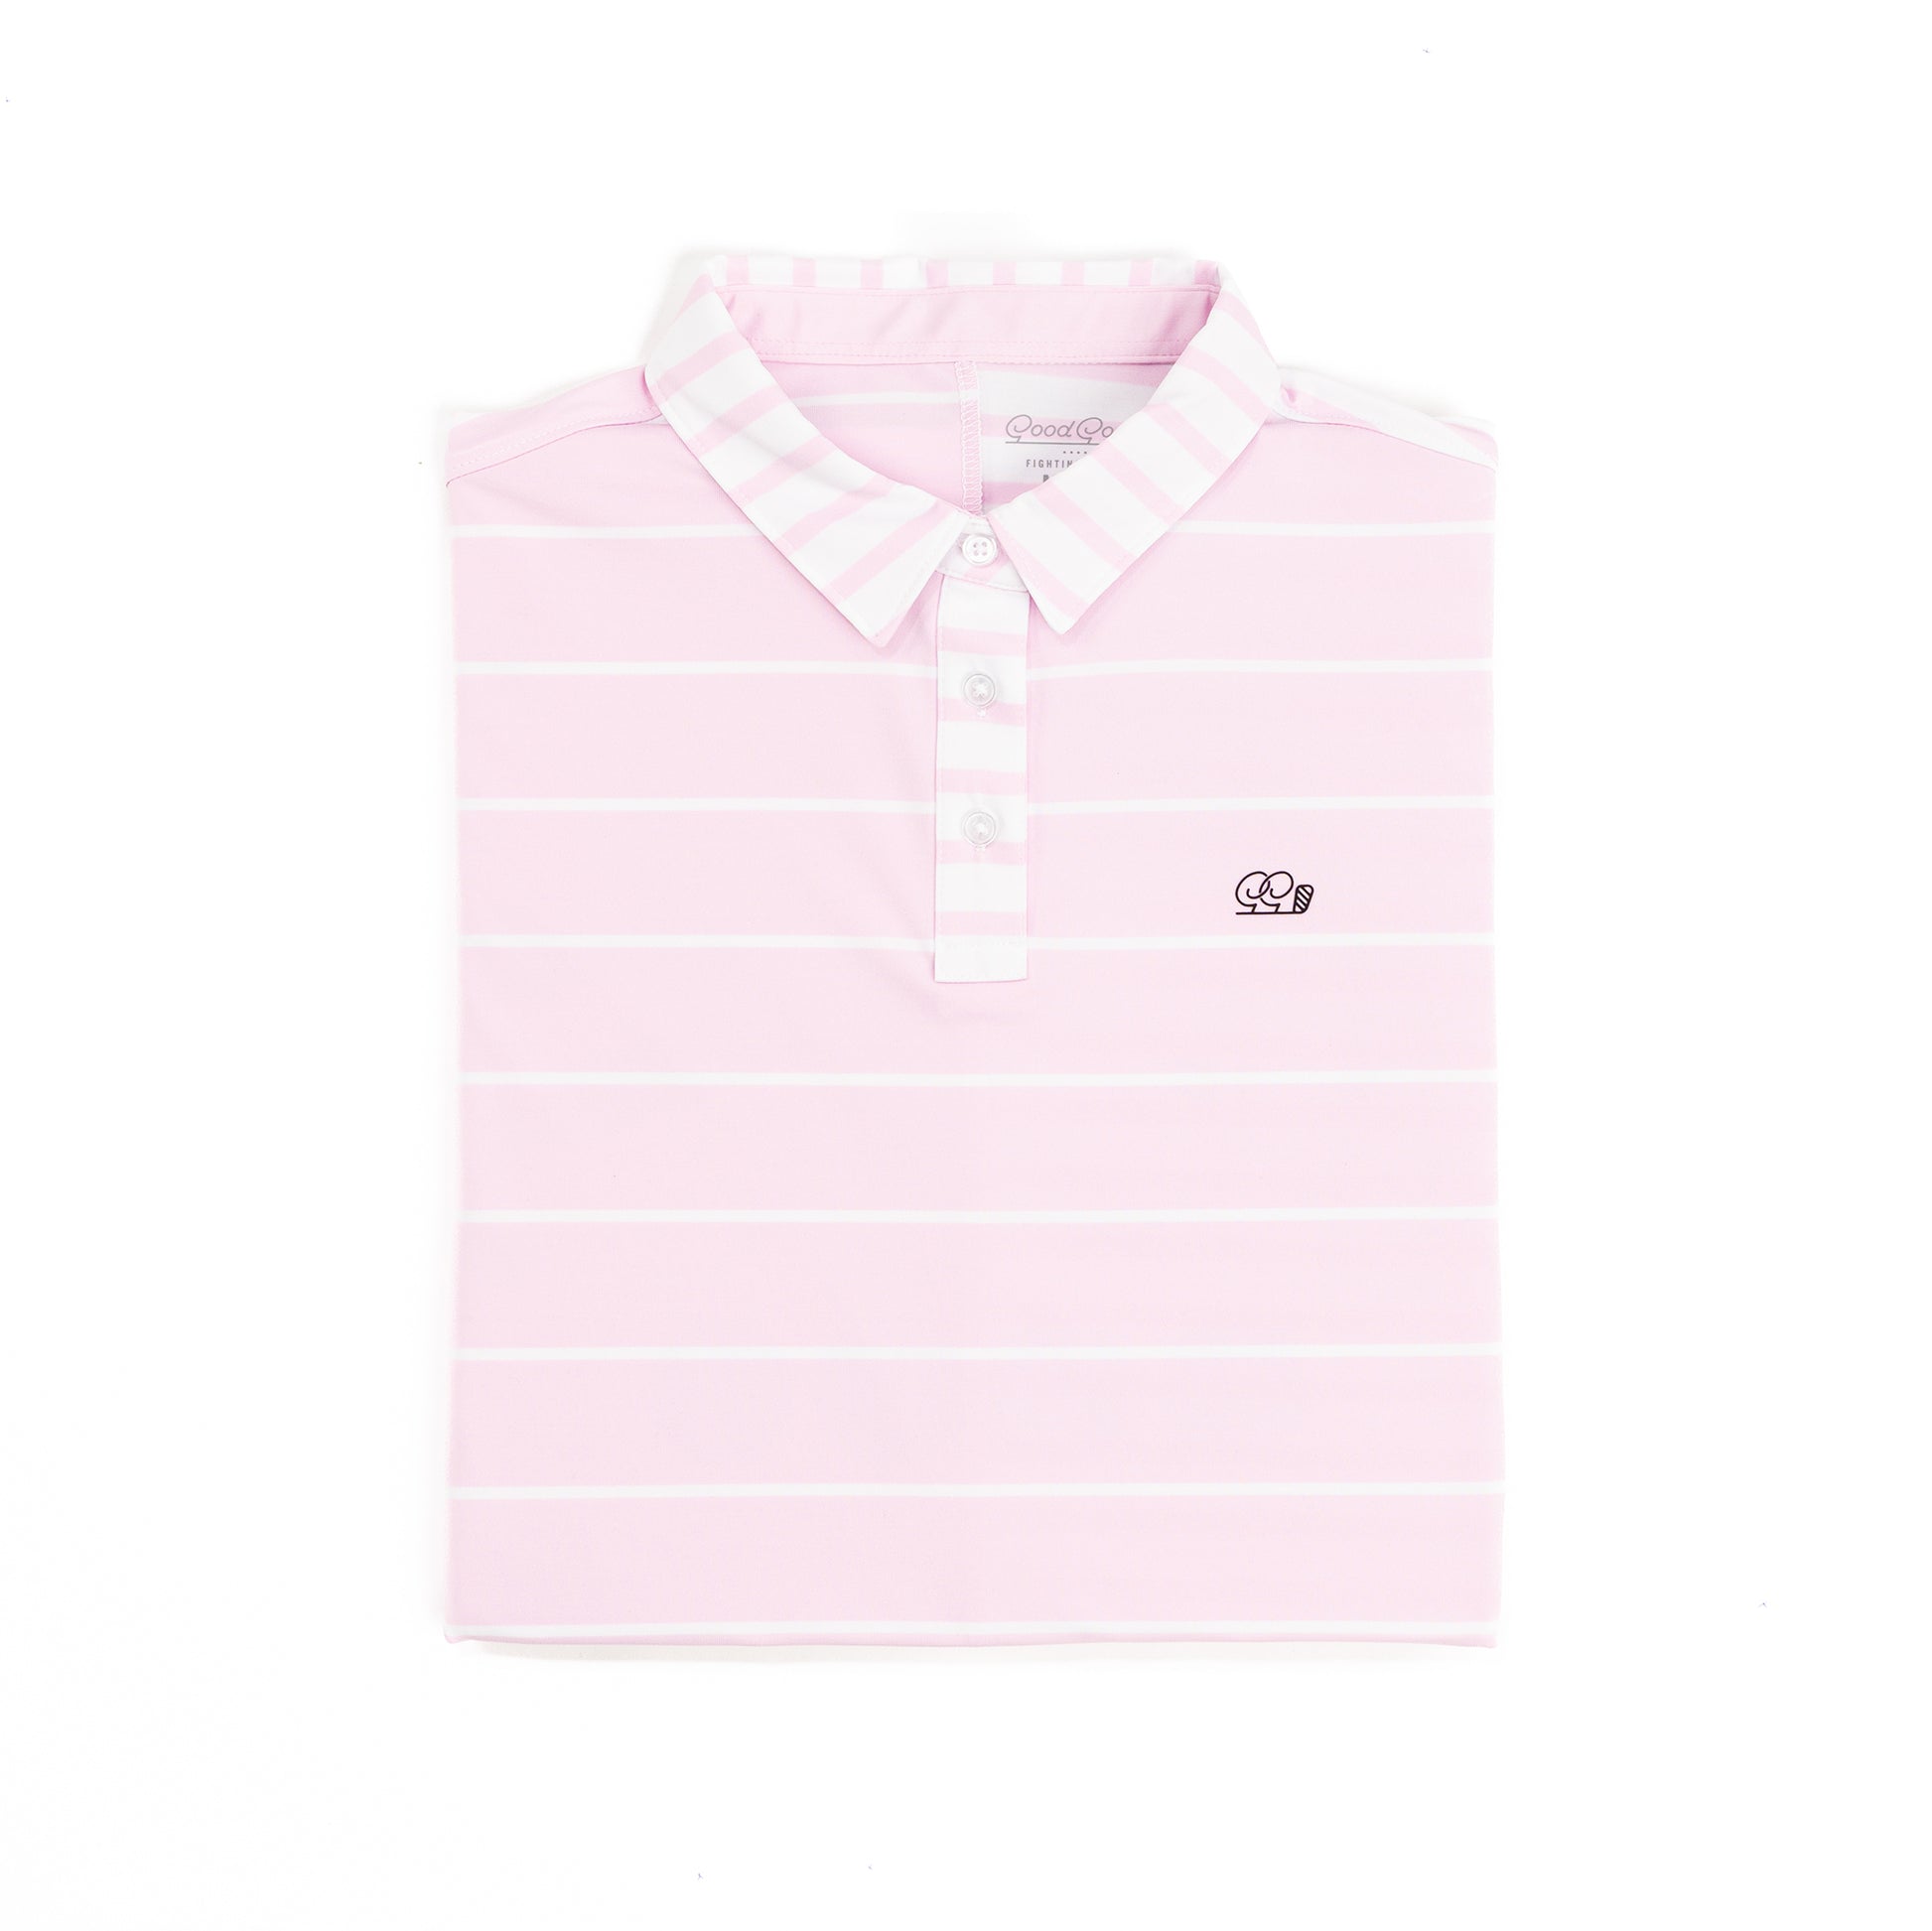 Women's Pretty In Pink Polo -Exclusive Performance Polo by Good Good Golf